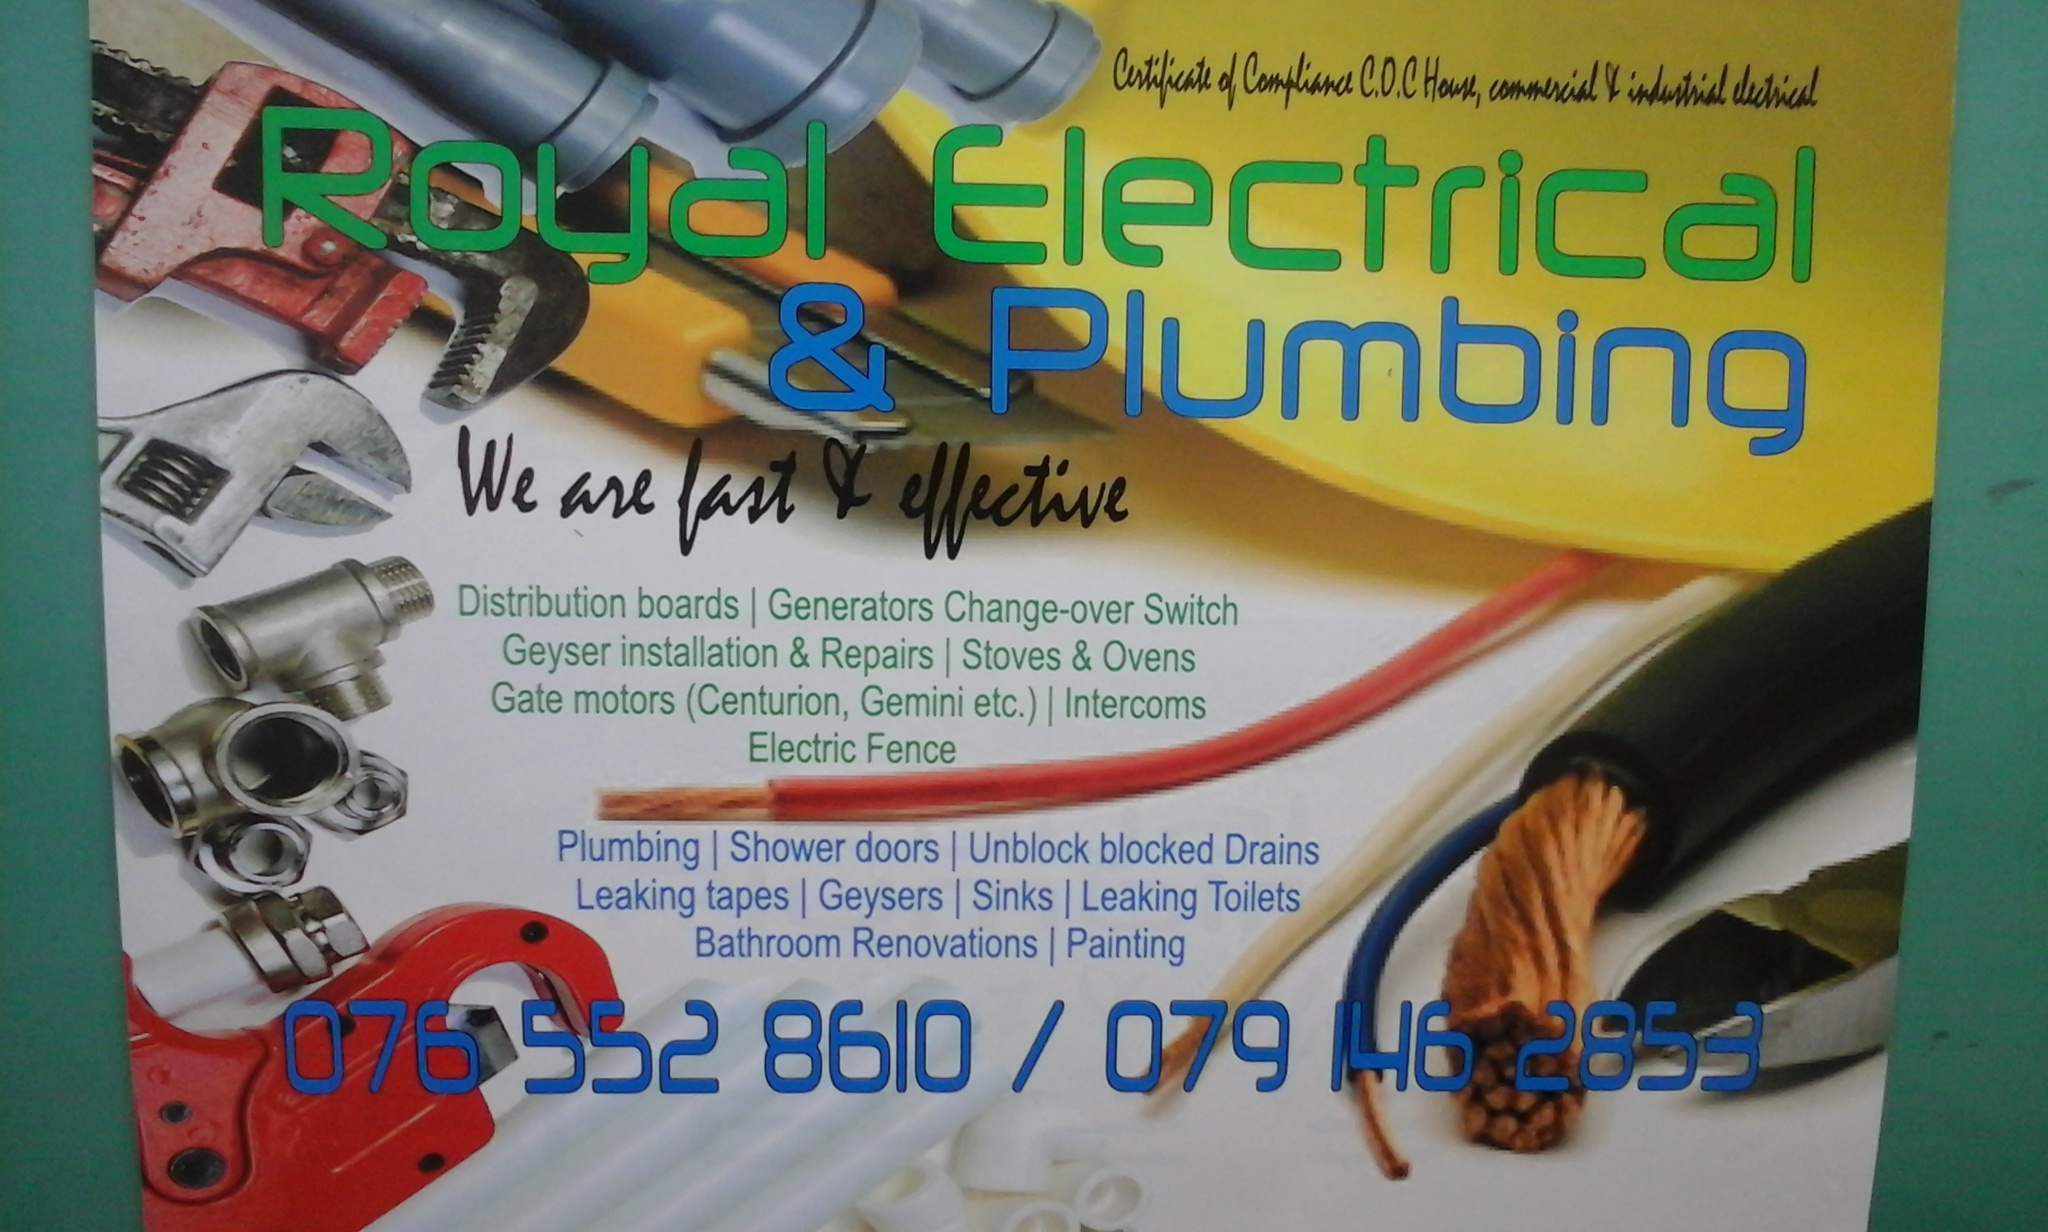 24hr Electrical And Plumbing Services 0765528610/0791462853